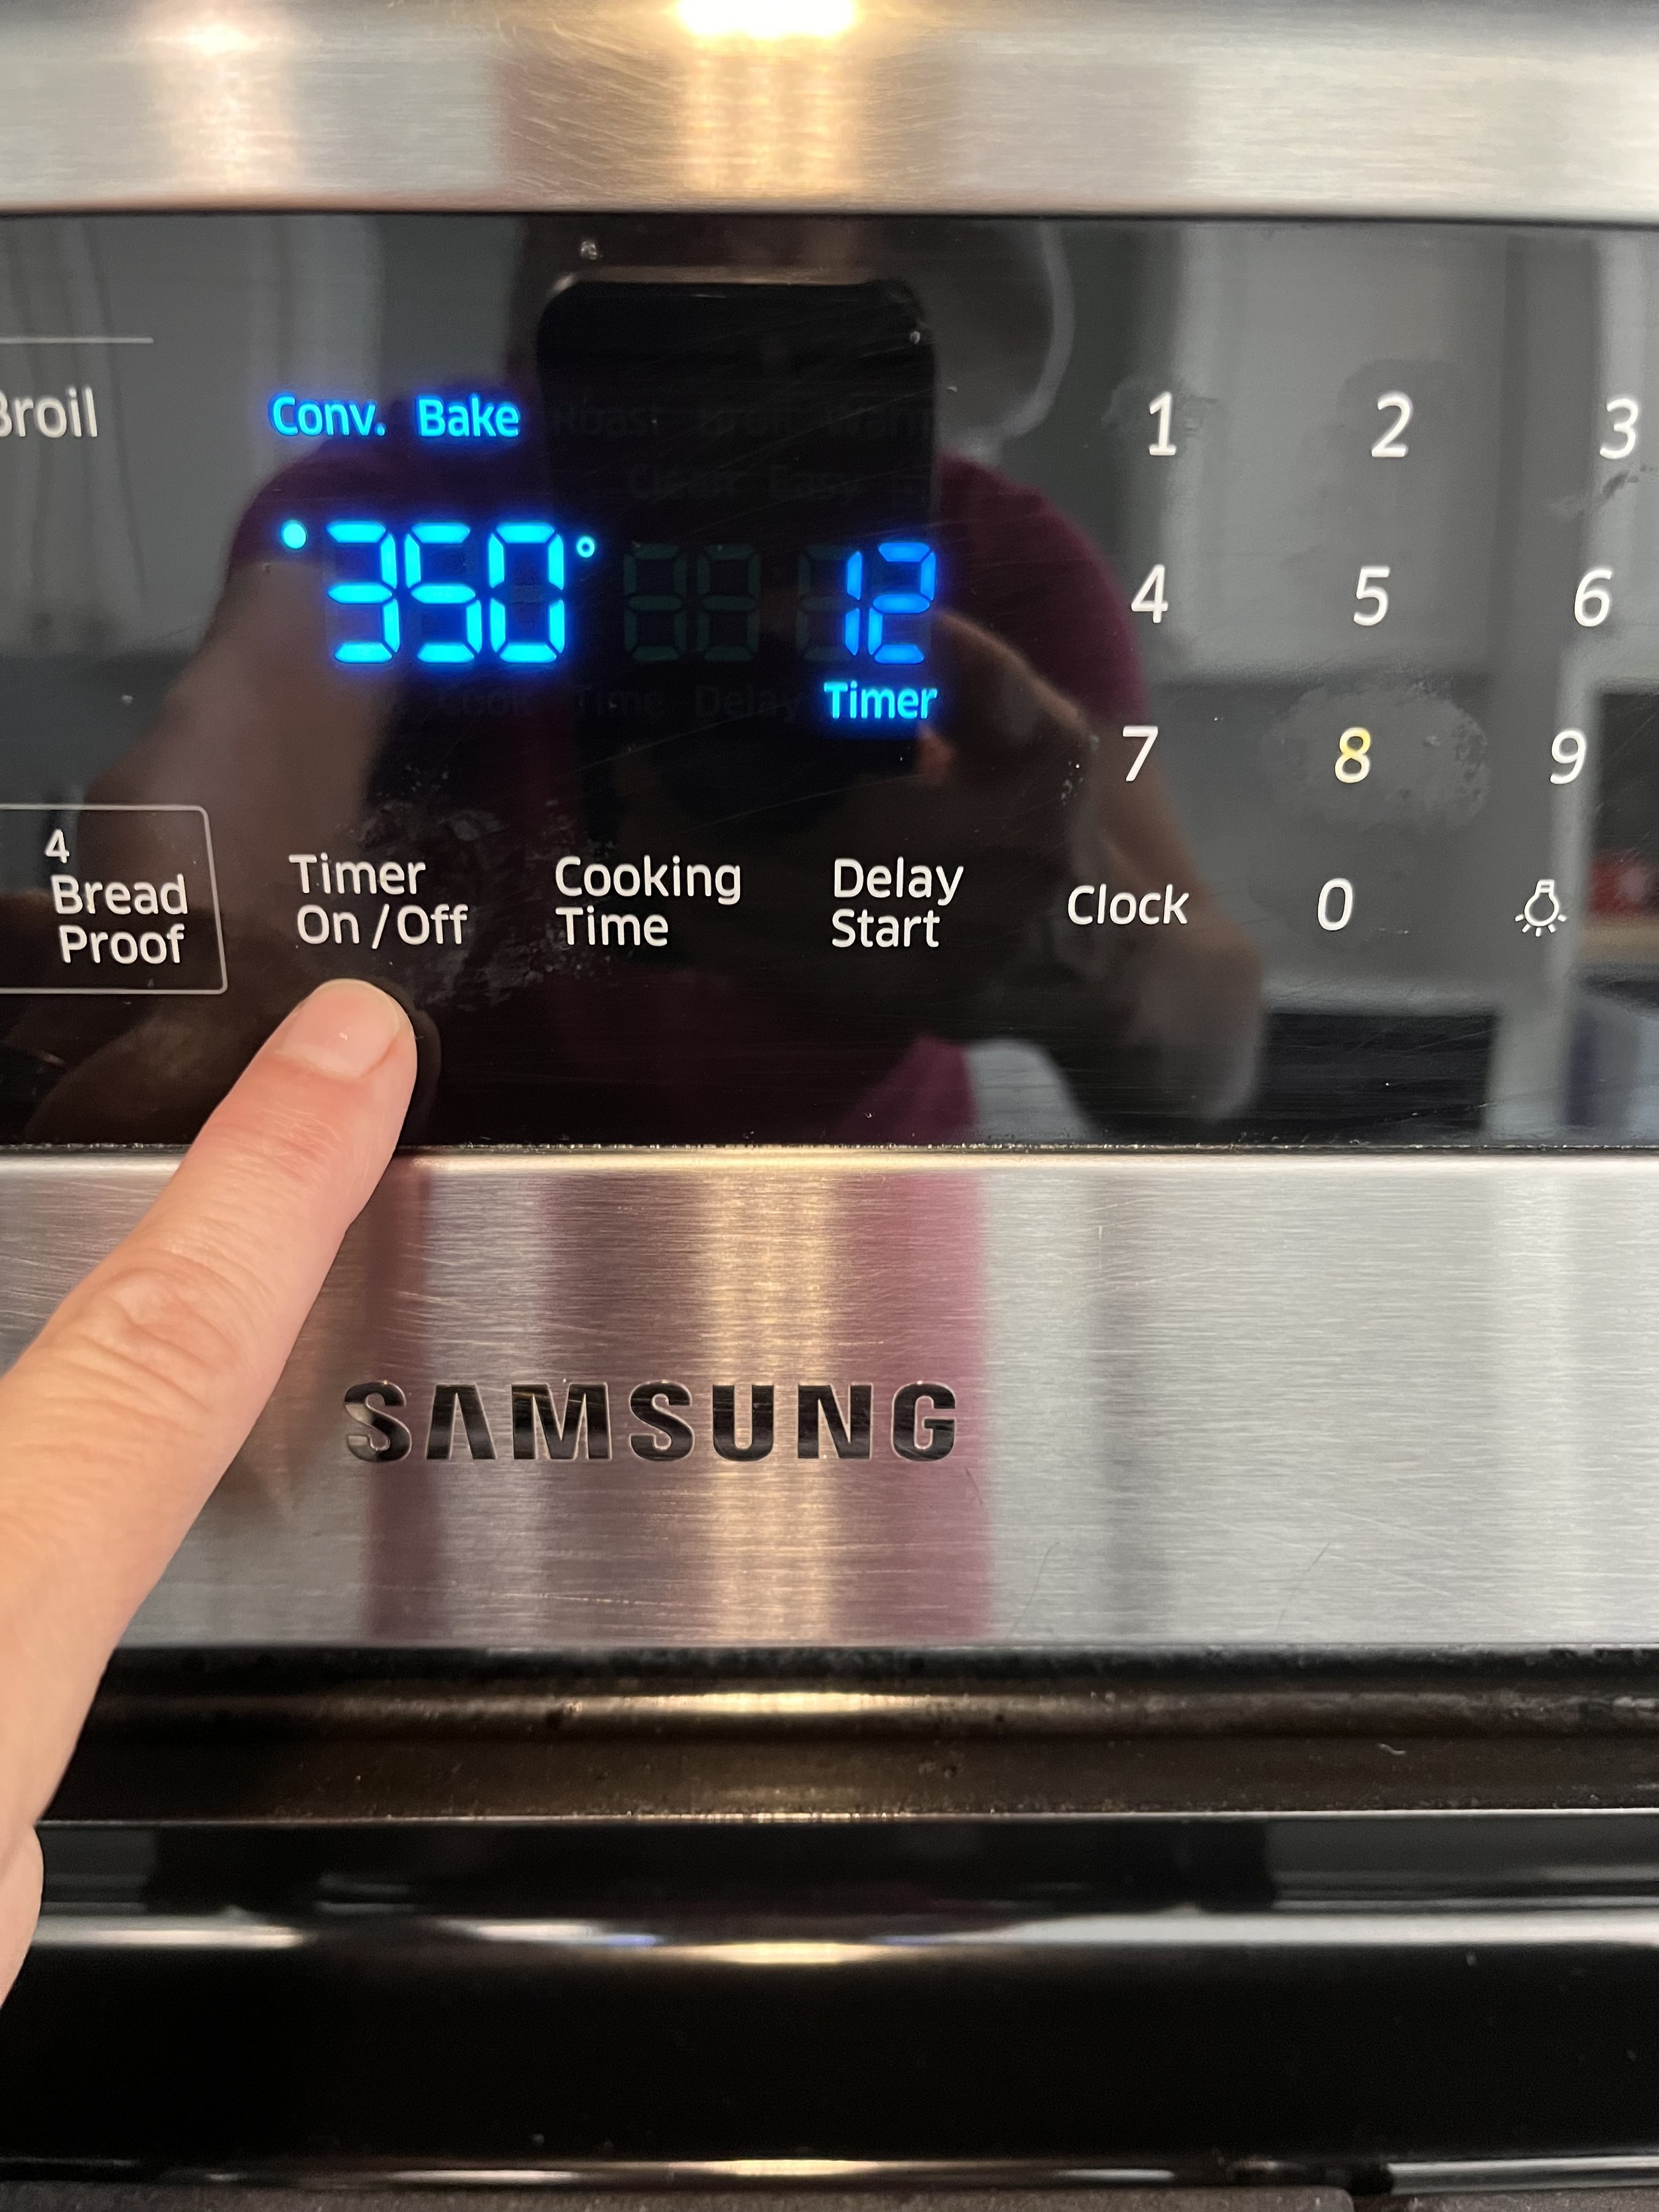 Set the Oven to 350*